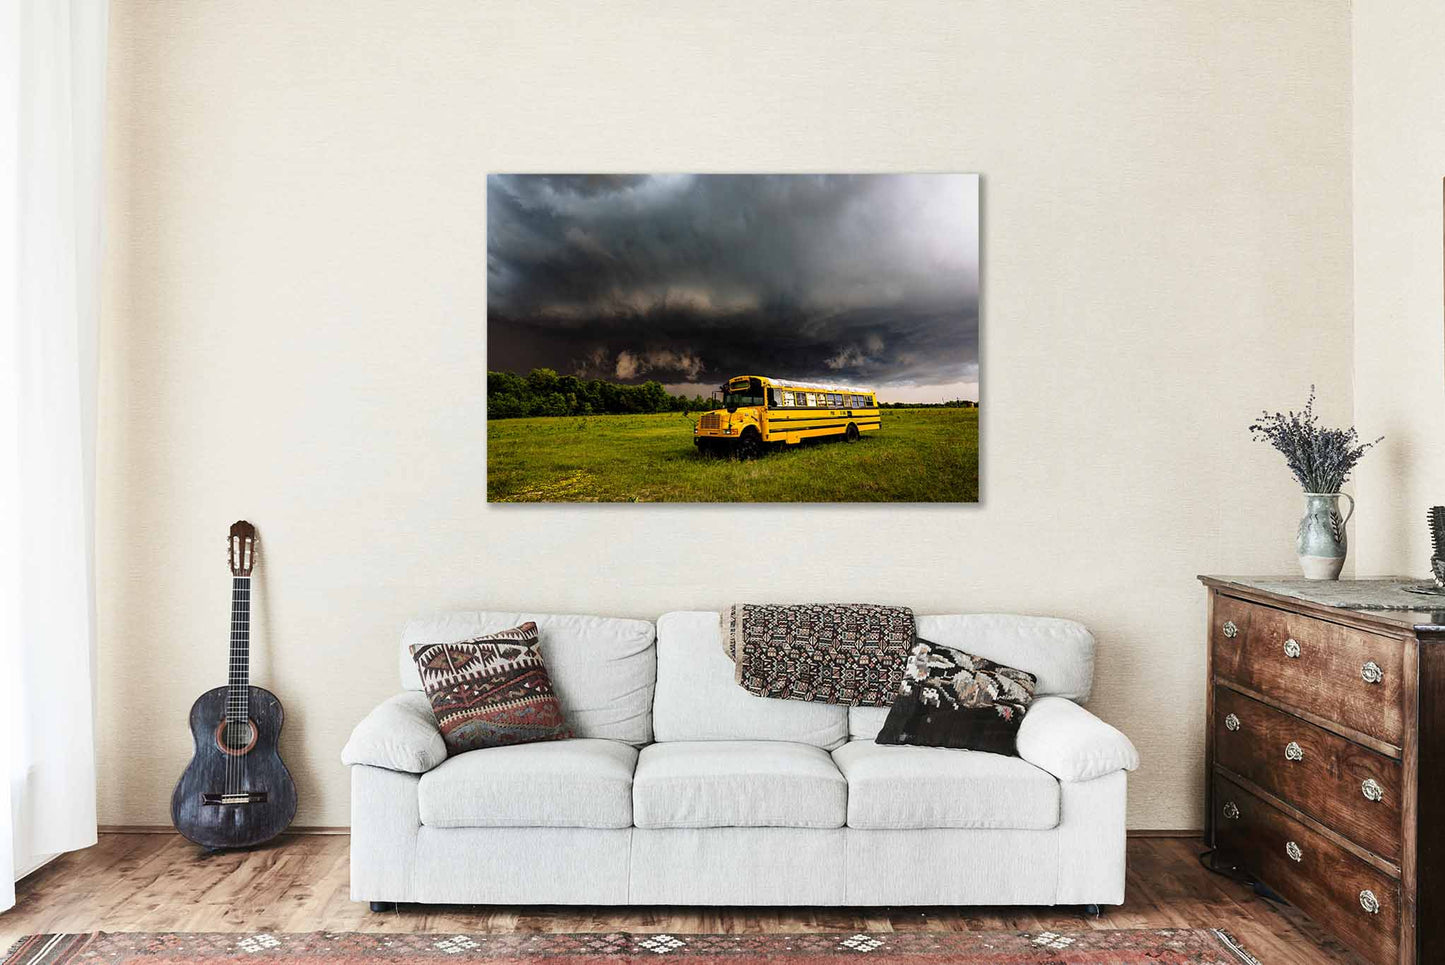 Storm Canvas Wall Art (Ready to Hang) Gallery Wrap of Thunderstorm Over Old School Bus on Stormy Sprng Day in Oklahoma Transportation Photography Classroom Decor